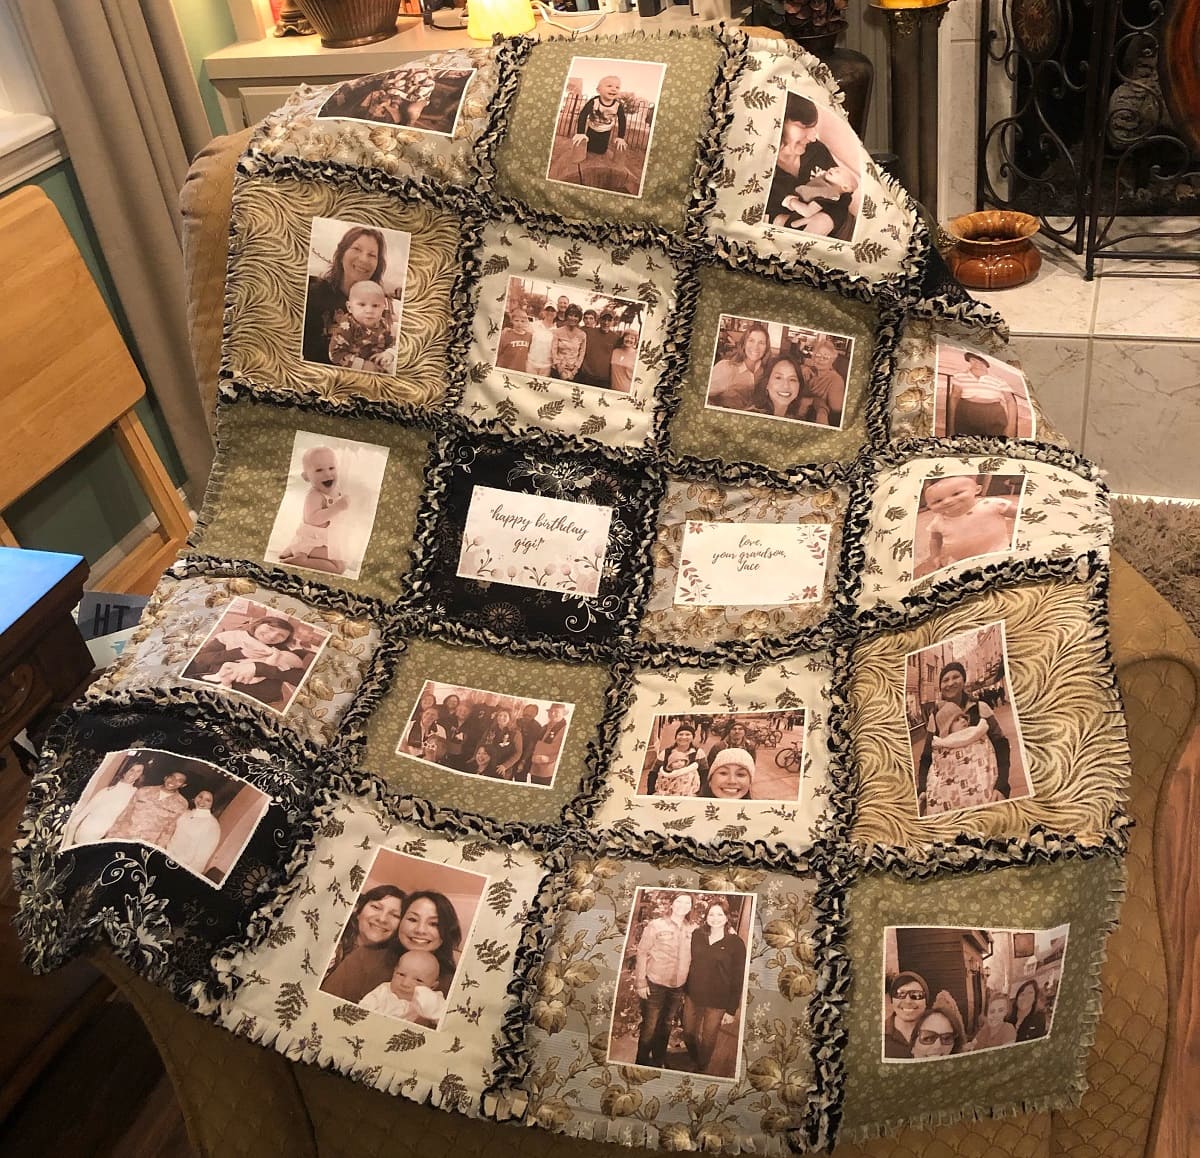 How To Make A Quilt With Photos